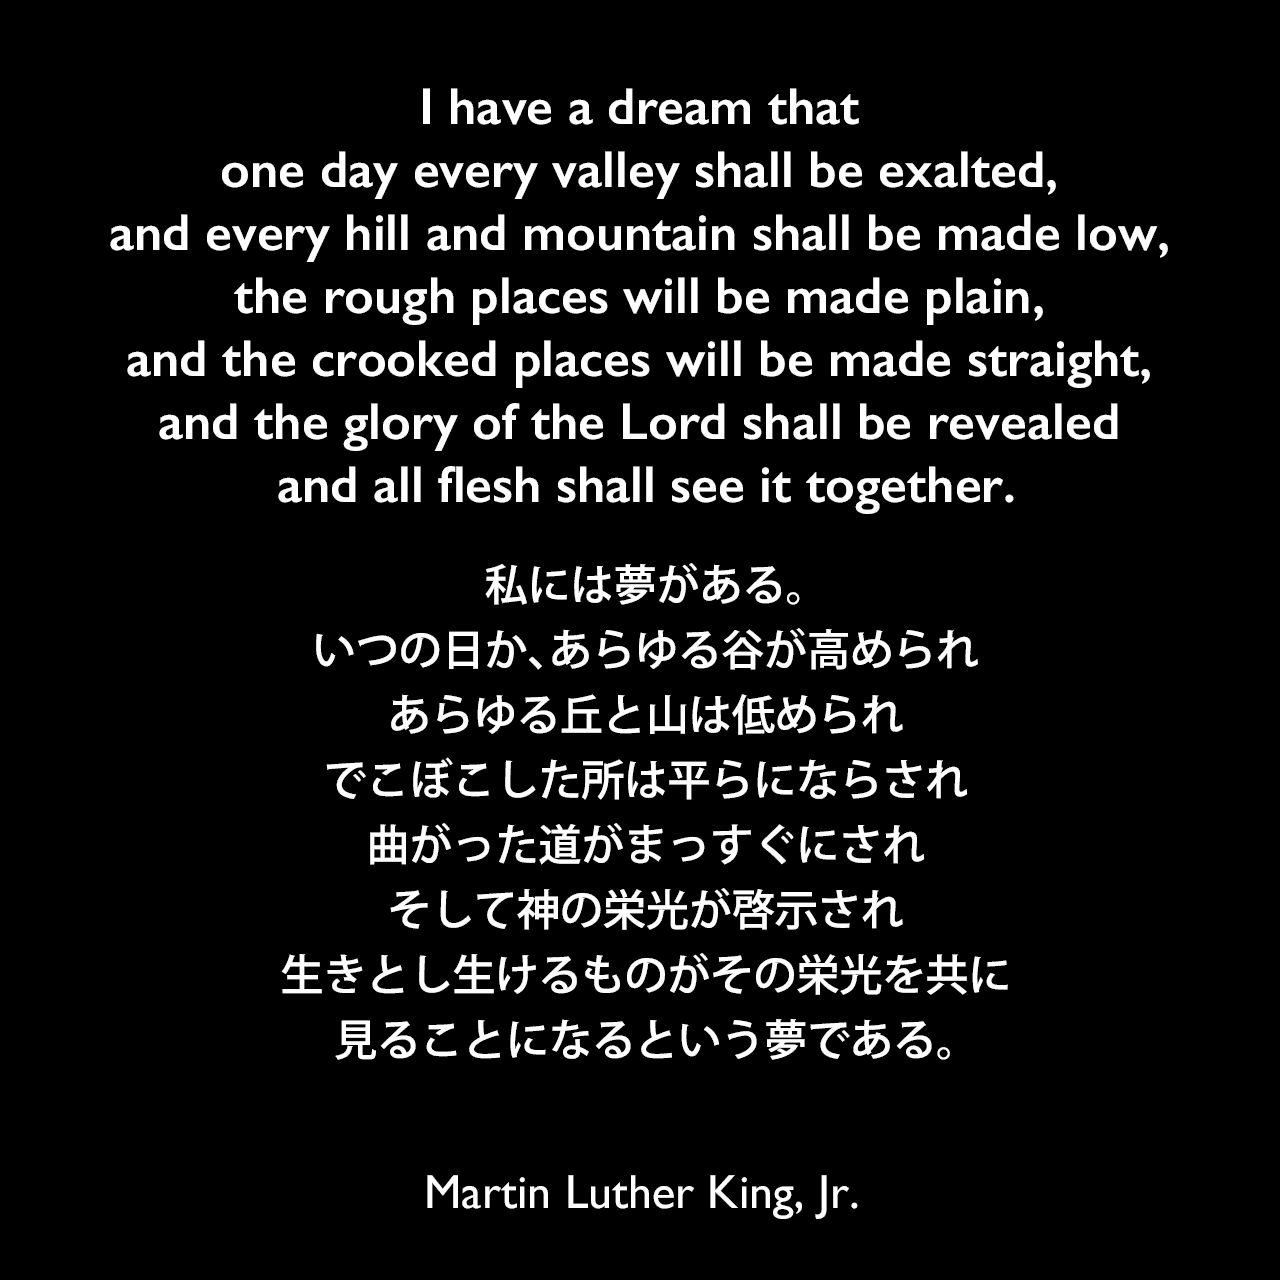 I have a dream that one day every valley shall be exalted, and every hill and mountain shall be made low, the rough places will be made plain, and the crooked places will be made straight, and the glory of the Lord shall be revealed and all flesh shall see it together.私には夢がある。いつの日か、あらゆる谷が高められ、あらゆる丘と山は低められ、でこぼこした所は平らにならされ、曲がった道がまっすぐにされ、そして神の栄光が啓示され、生きとし生けるものがその栄光を共に見ることになるという夢である。- 1963年の演説「Cobo Center speech」よりMartin Luther King, Jr.